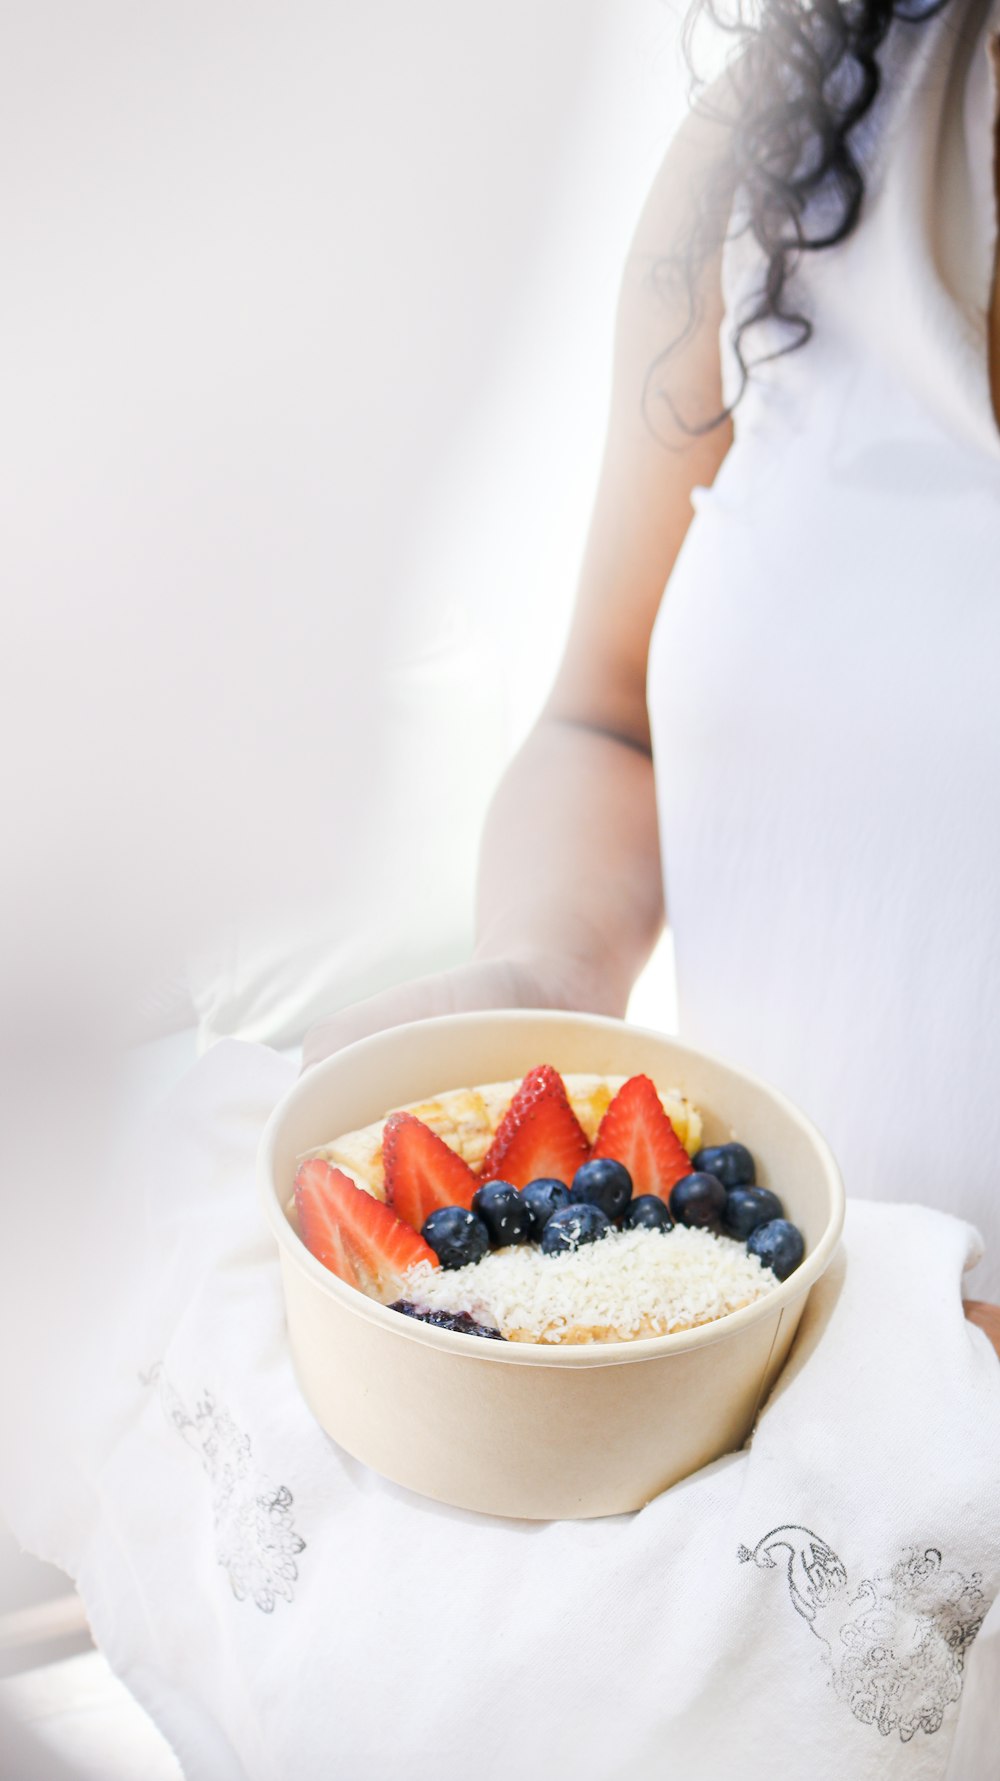 a woman is holding a bowl of cereal with strawberries and blueberries